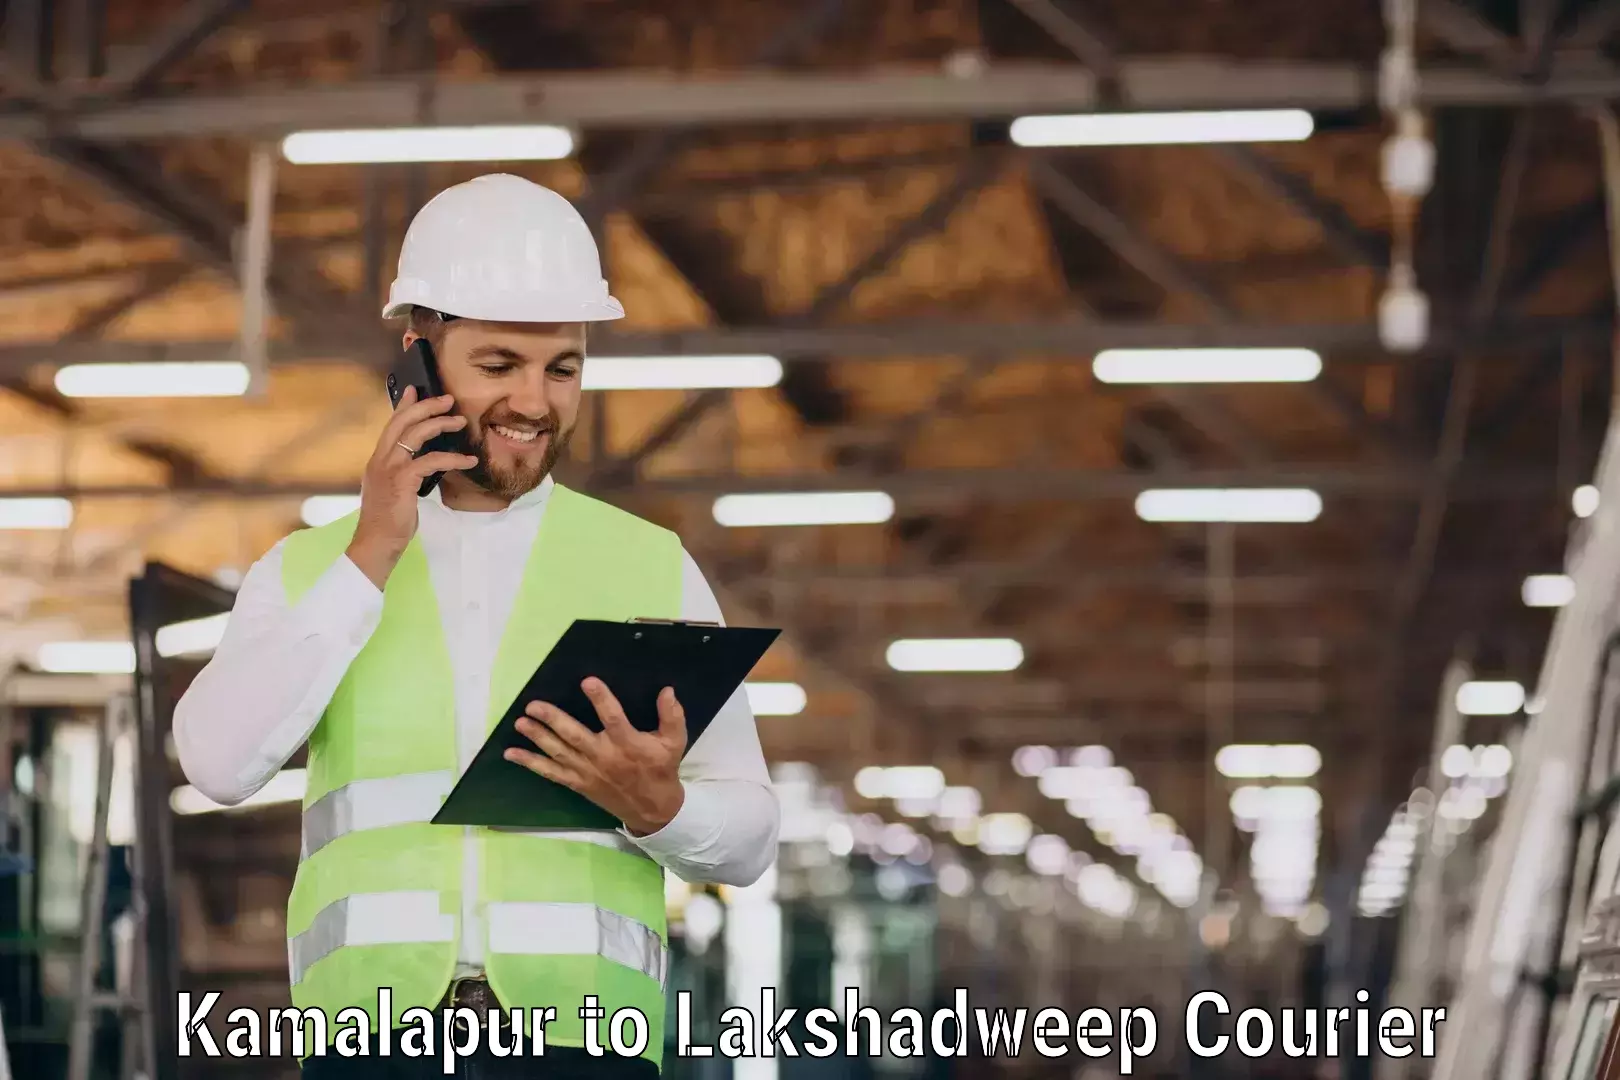 End-to-end delivery in Kamalapur to Lakshadweep